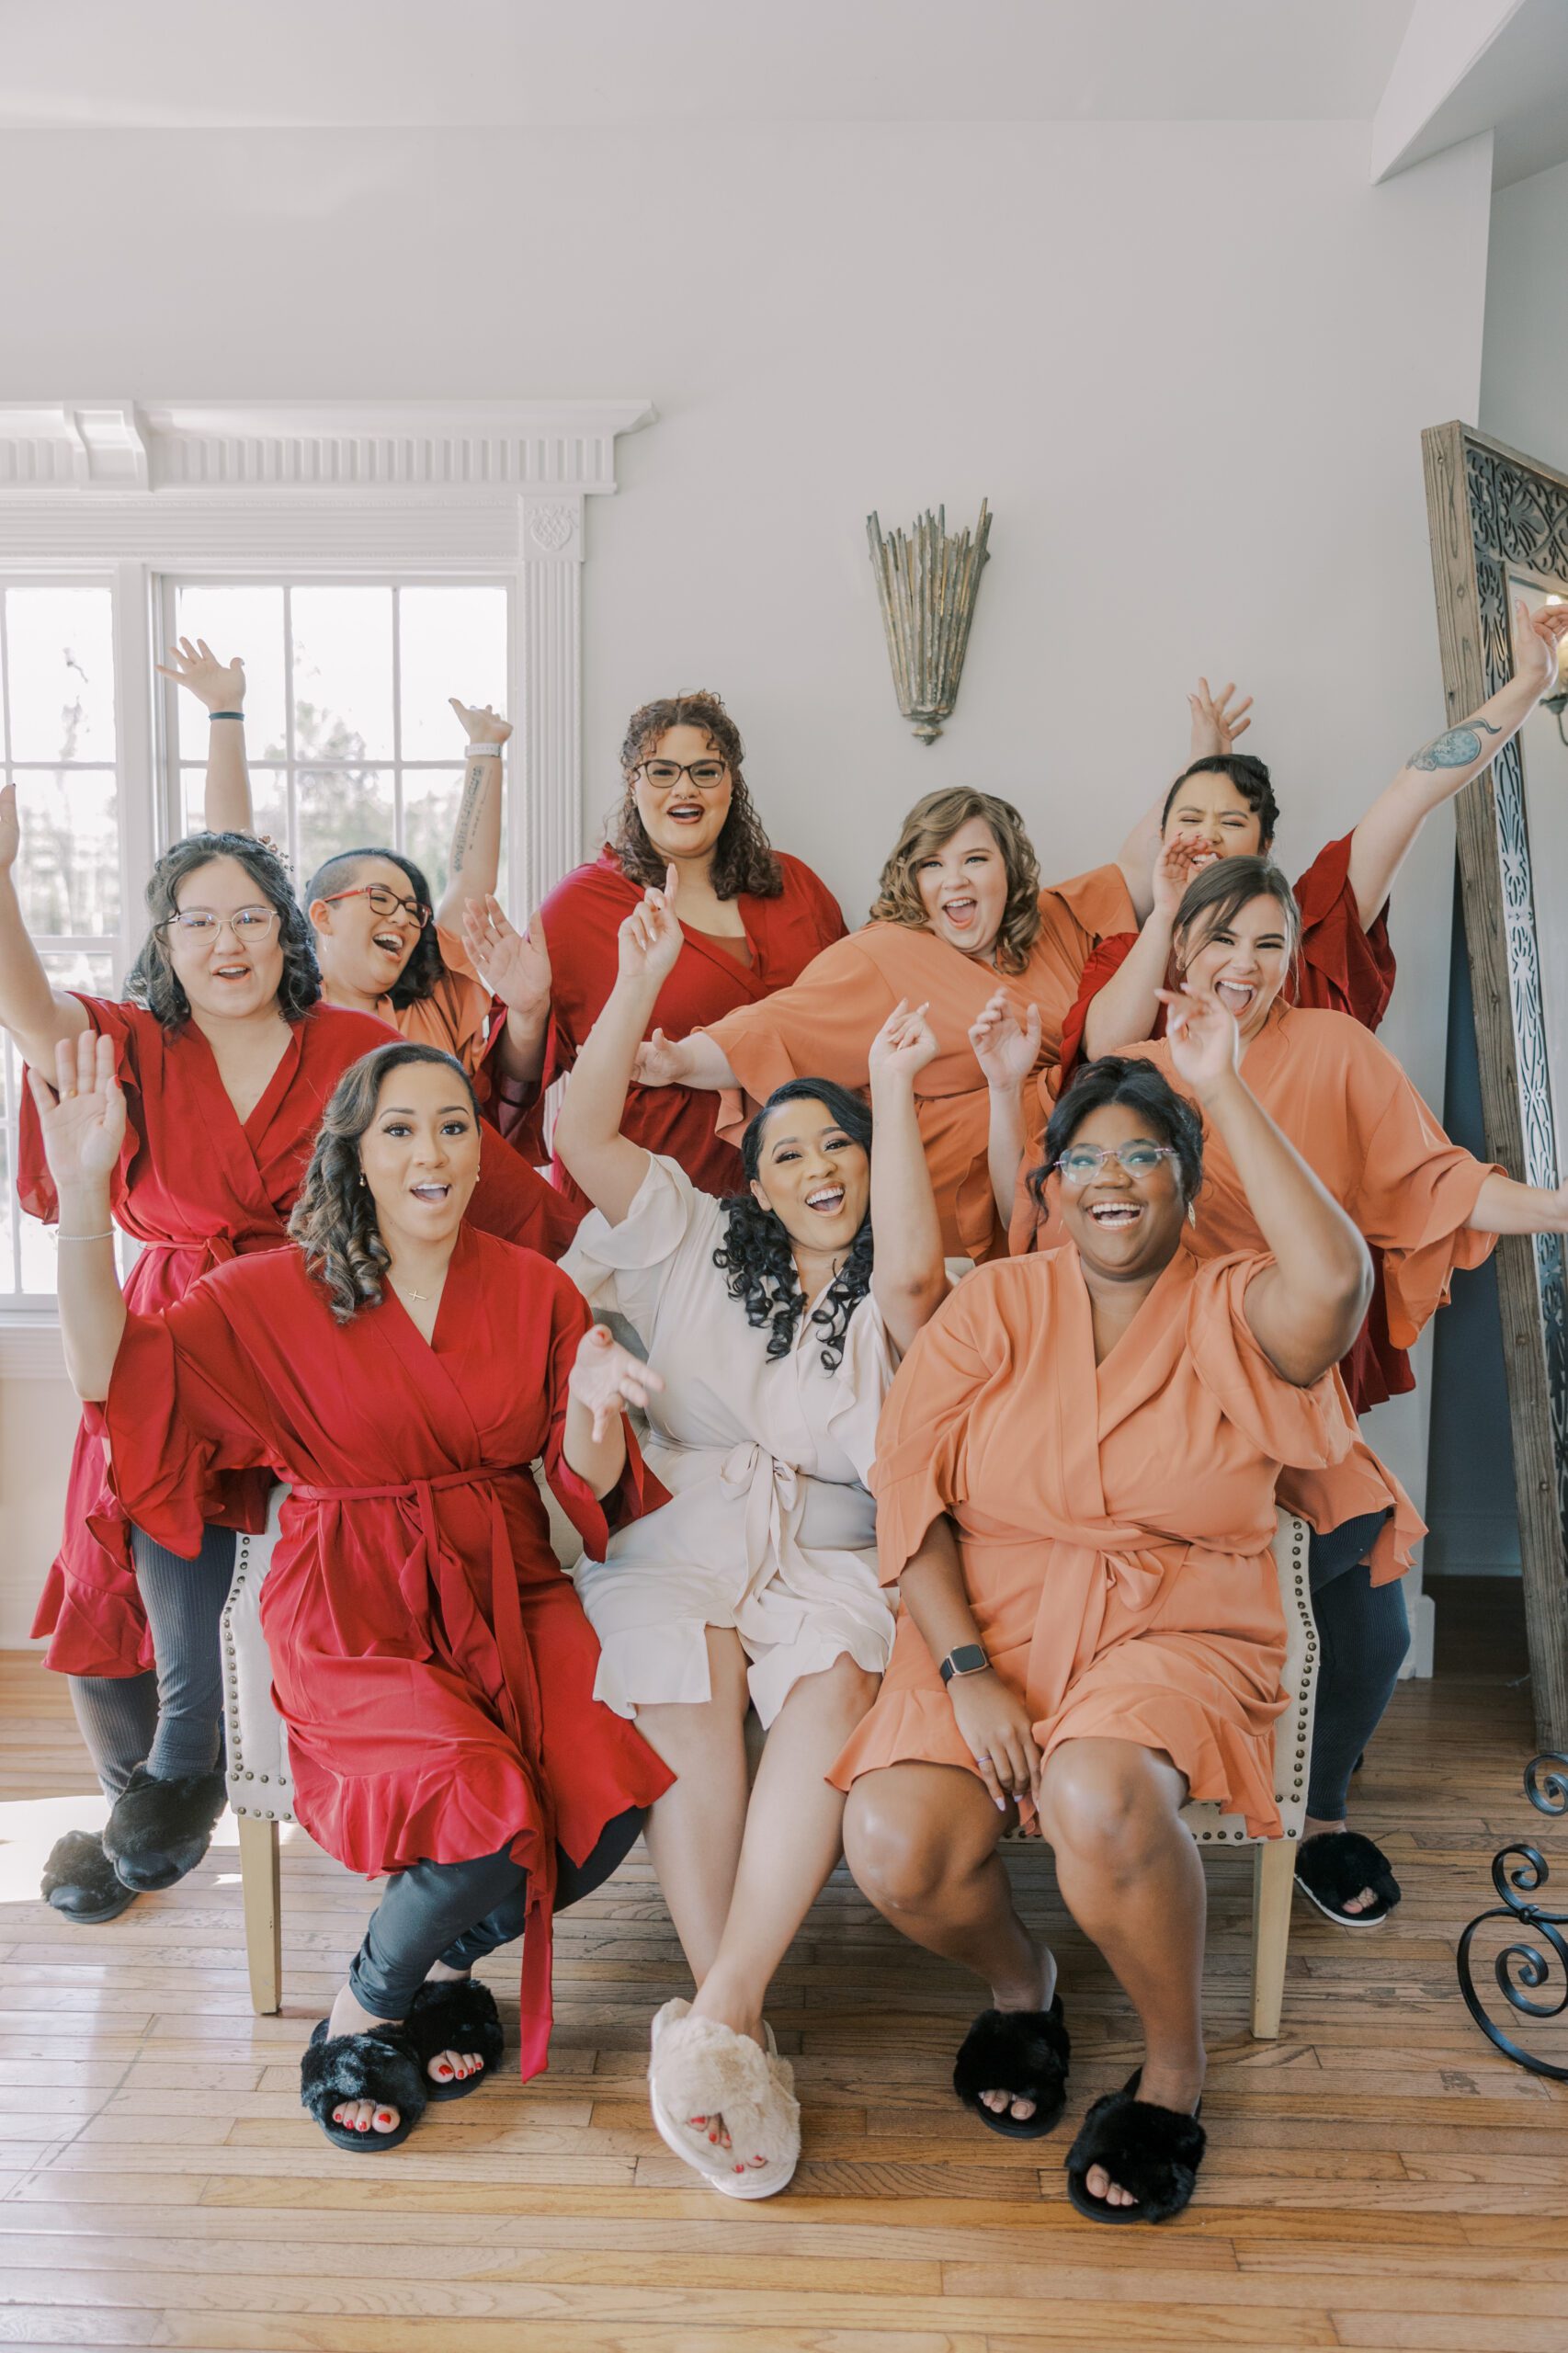 Group photo of bride wearing a white robe, and her bridesmaids wearing red and orange robes, all cheering with their hands up in the air at the manor at airmont fall wedding